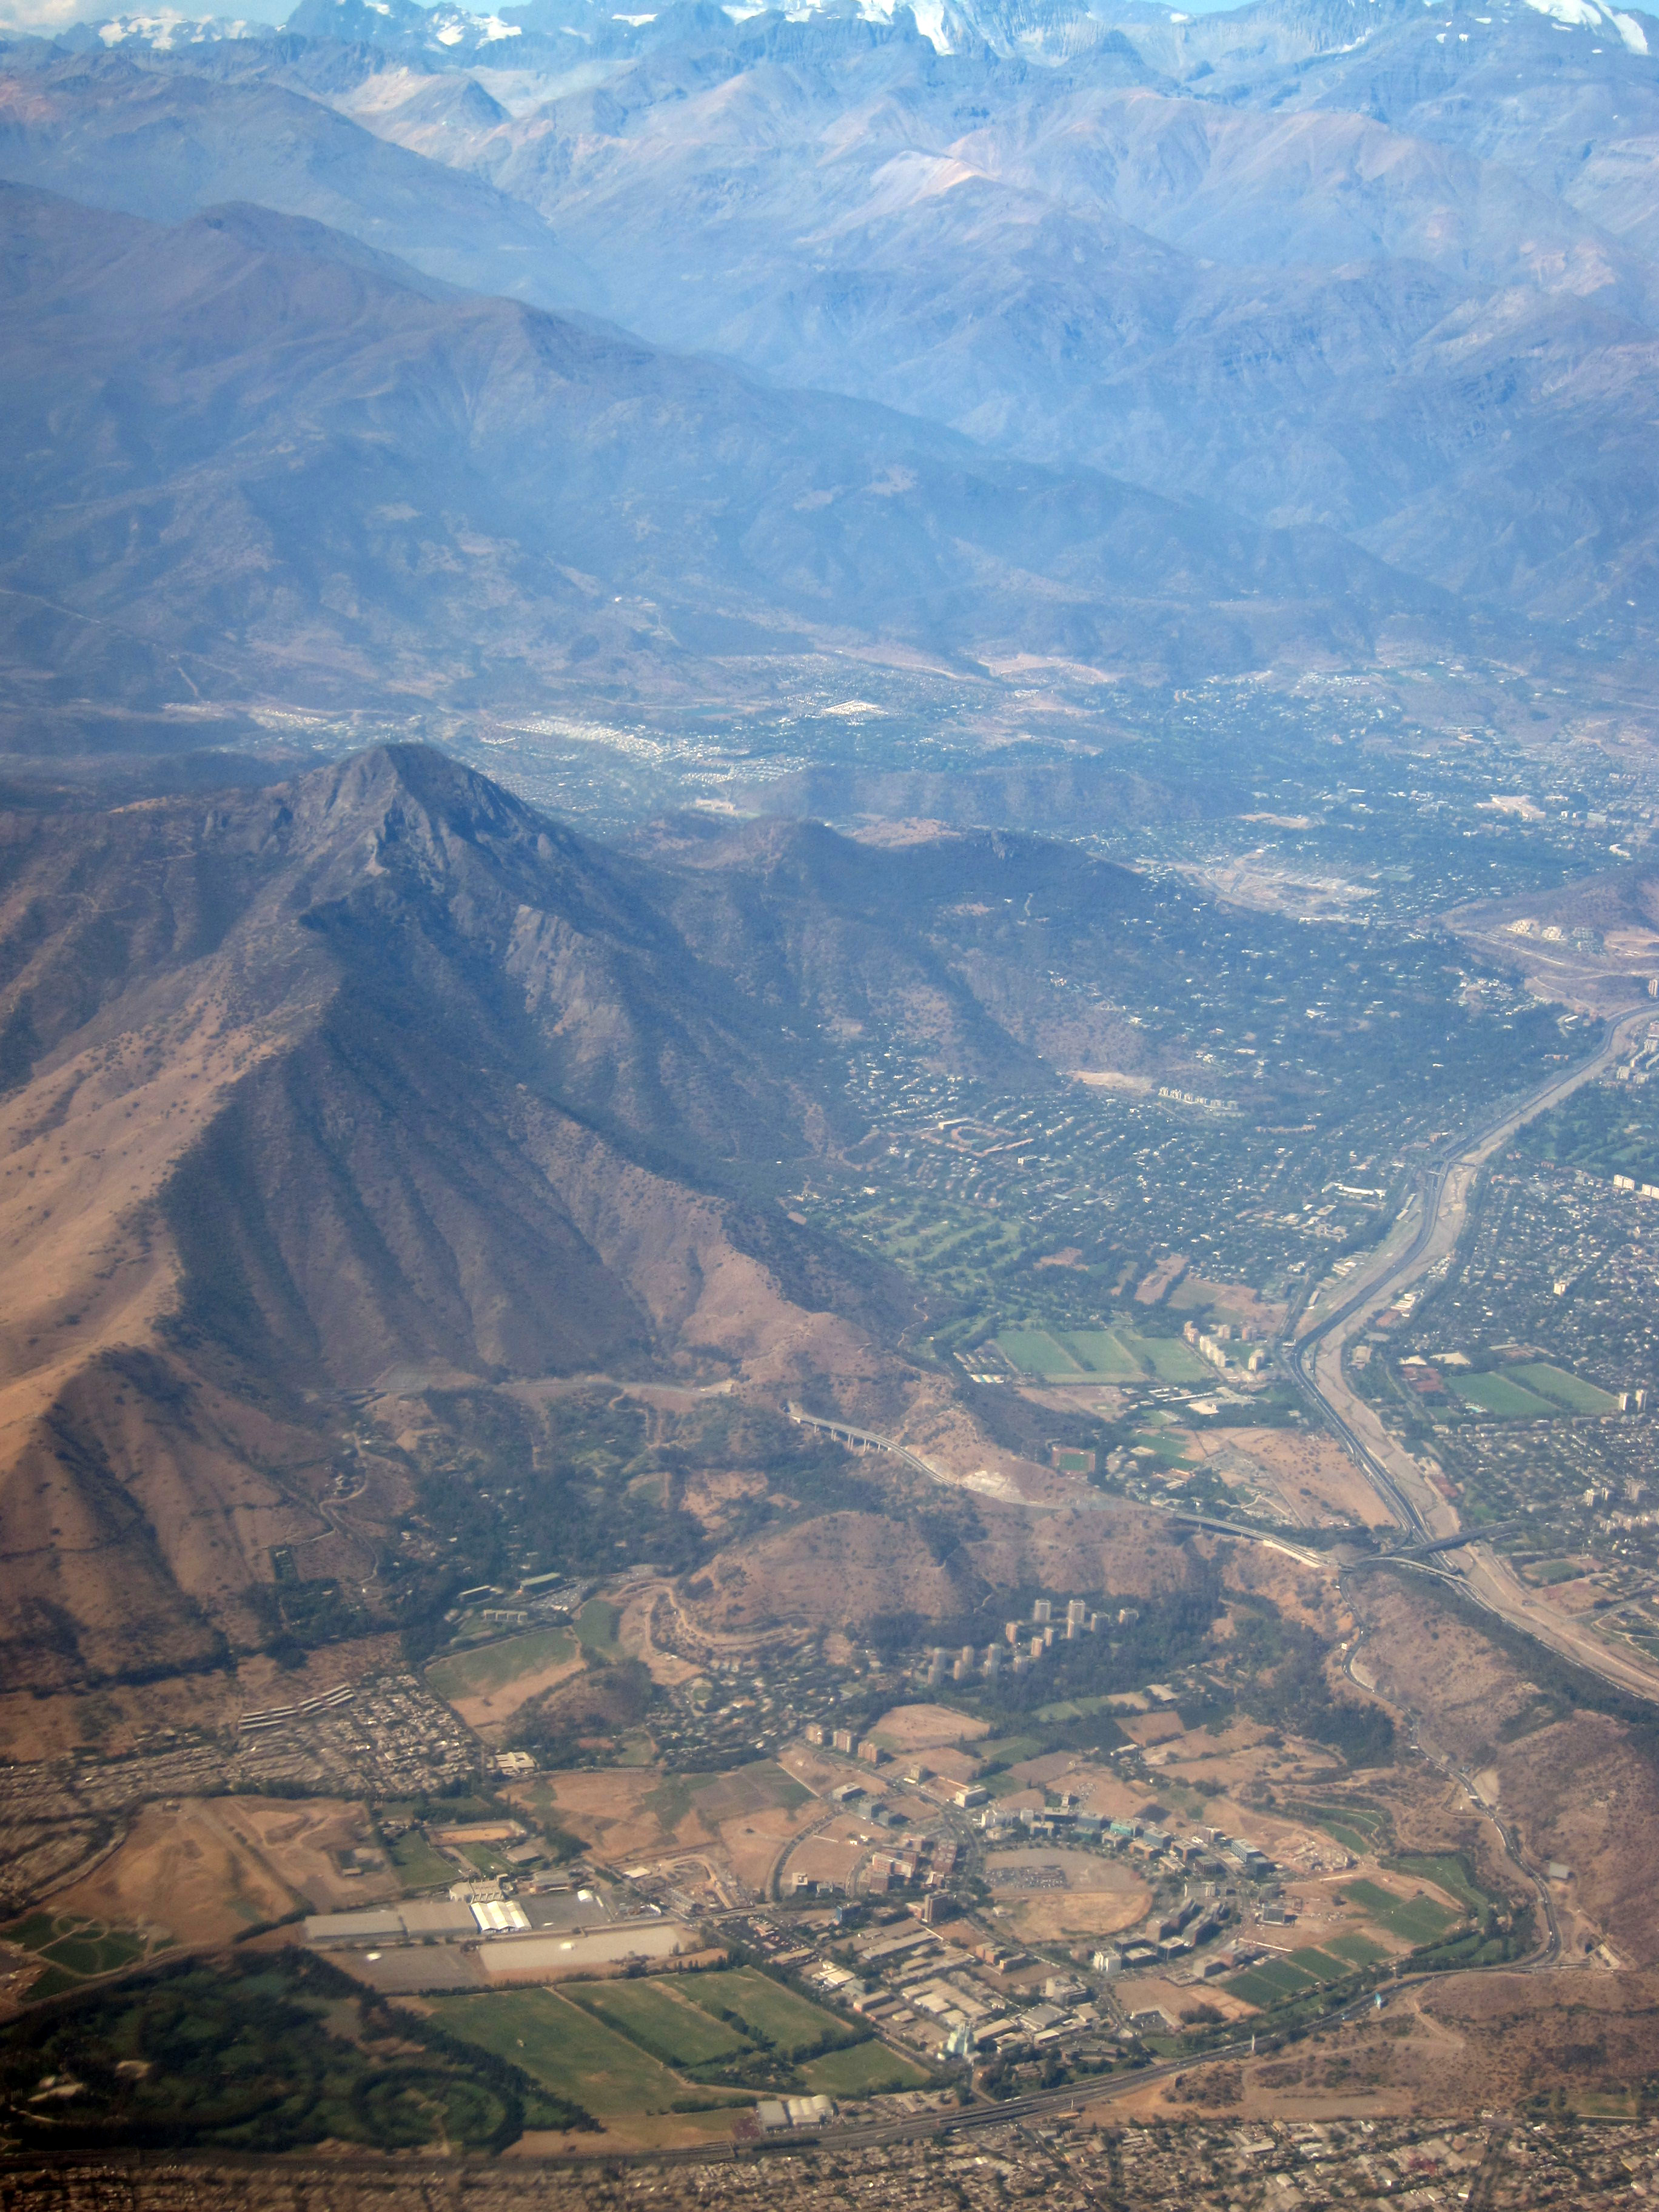 Santiago from the plane